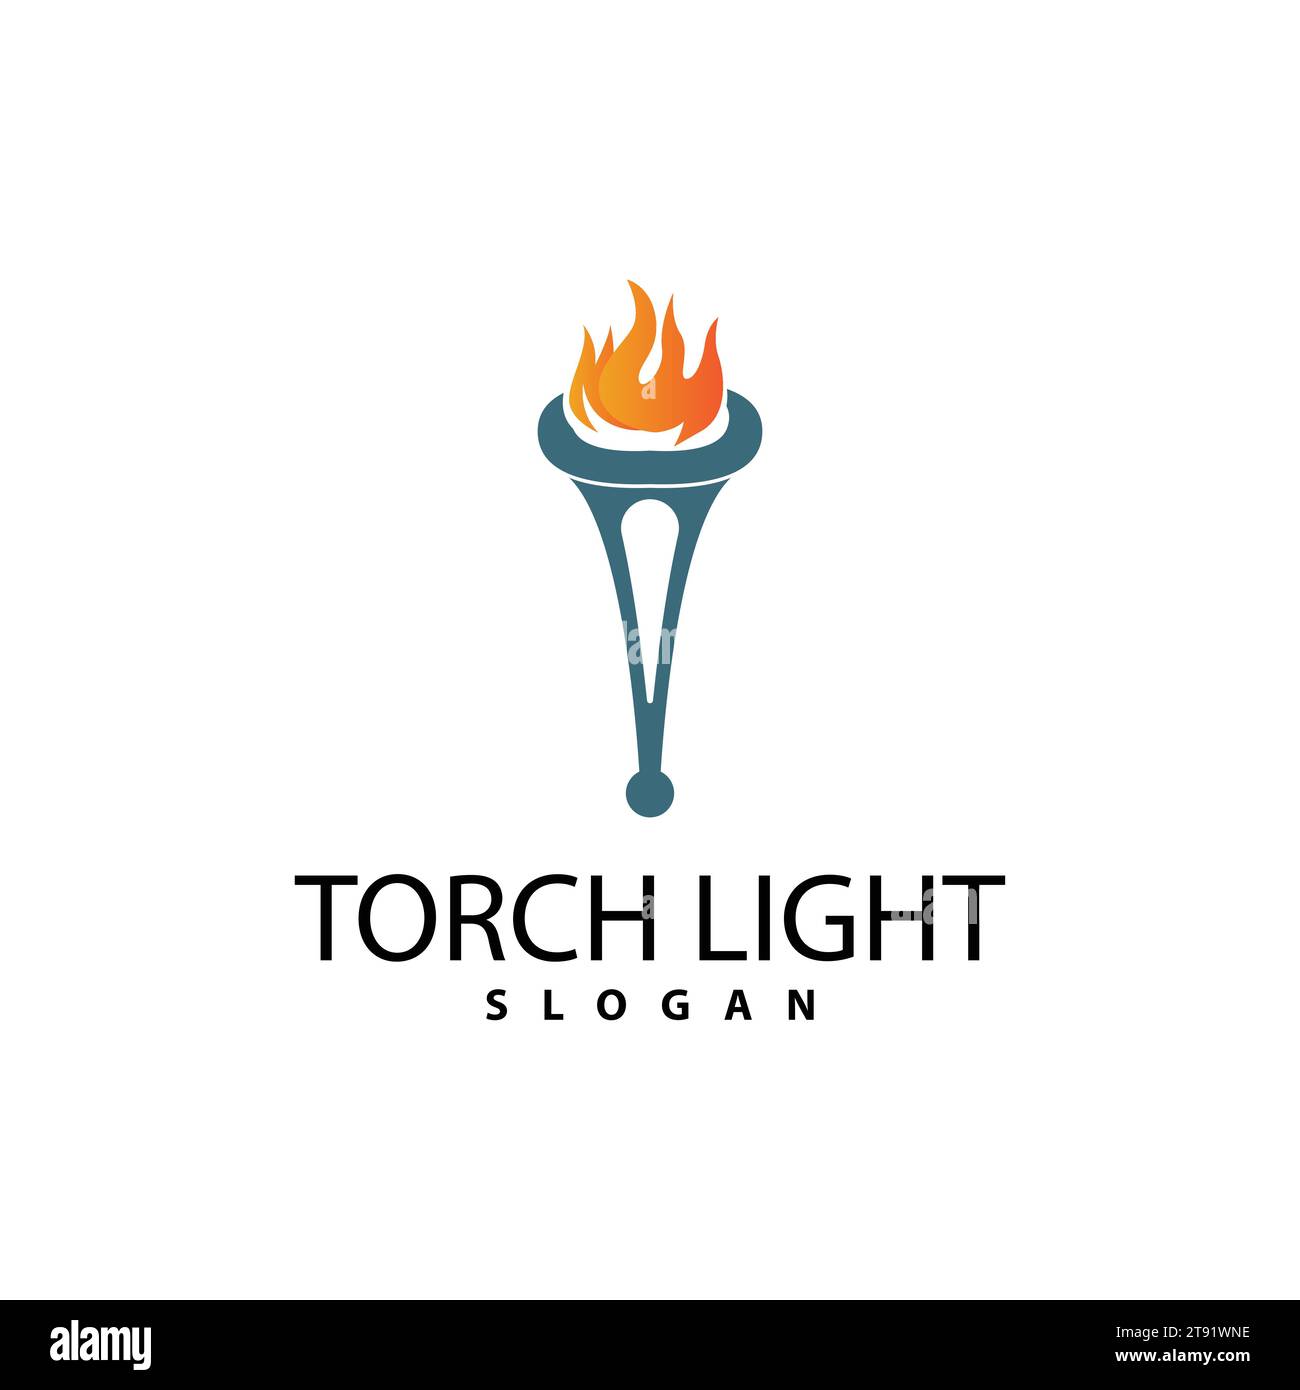 Torch Logo, Olympic Flame Vector, Simple Minimalist Design Template Illustration Stock Vector